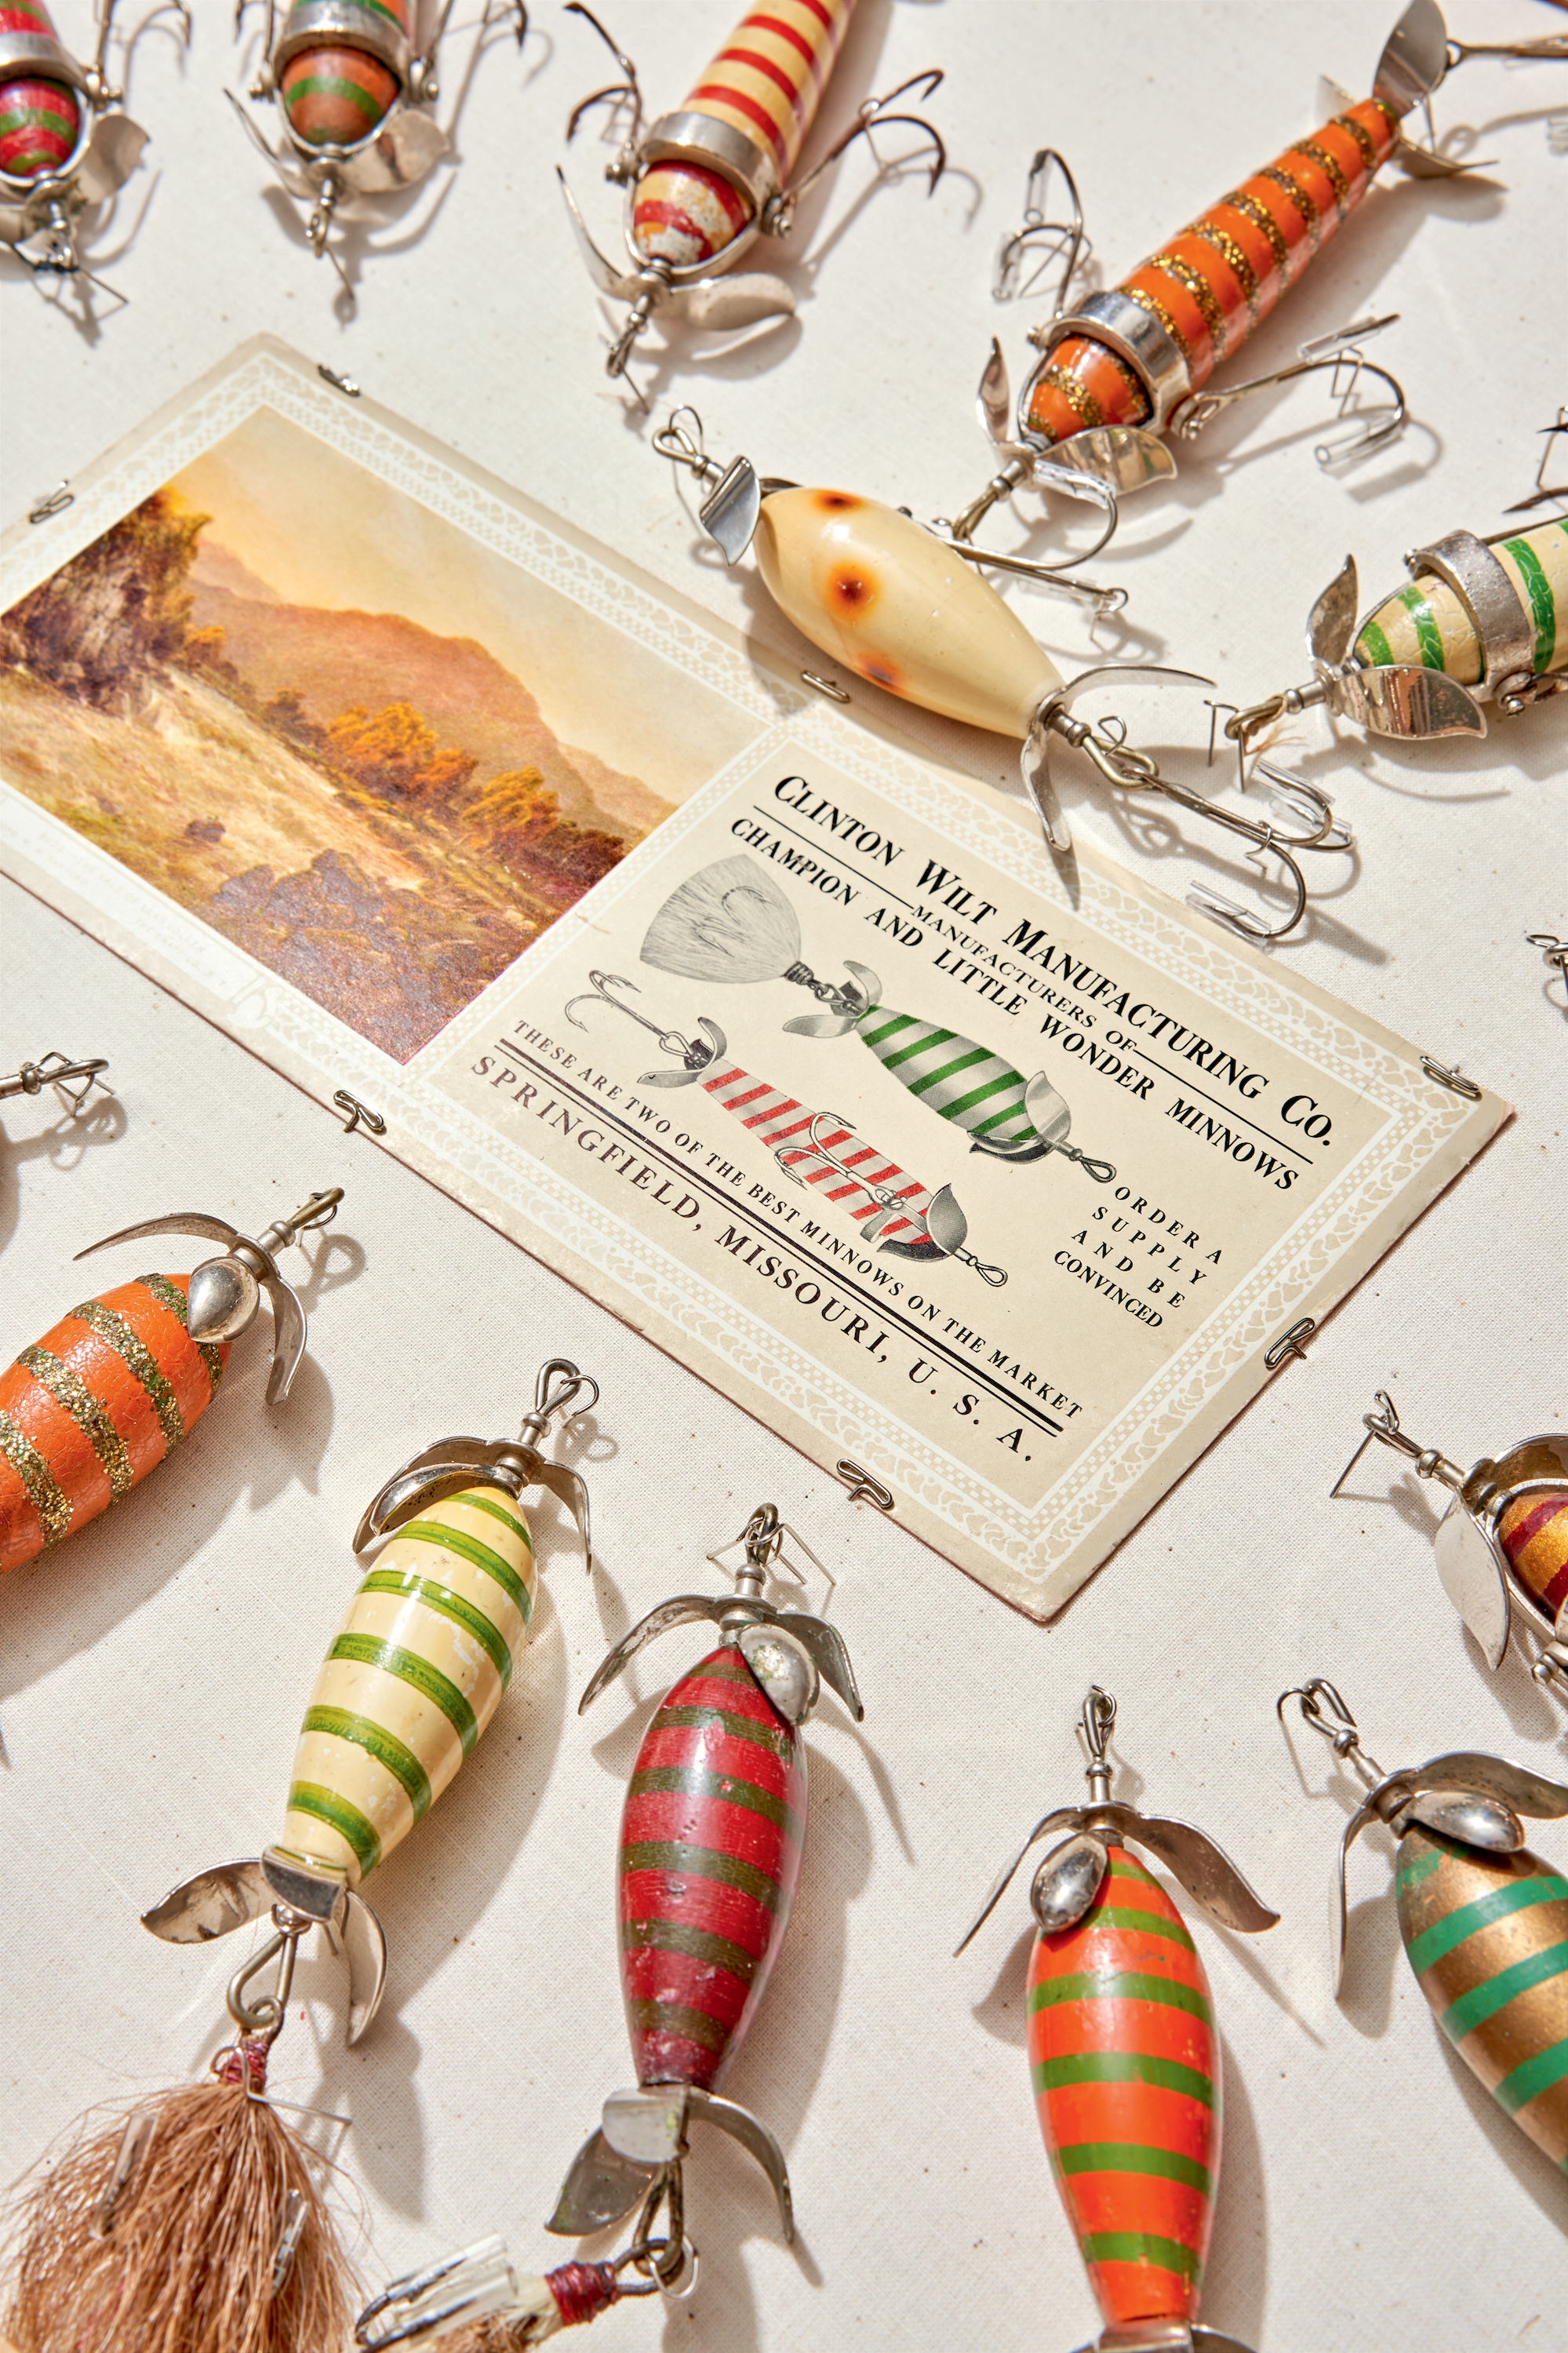 Collectors hooked on the allure of antique fishing lures